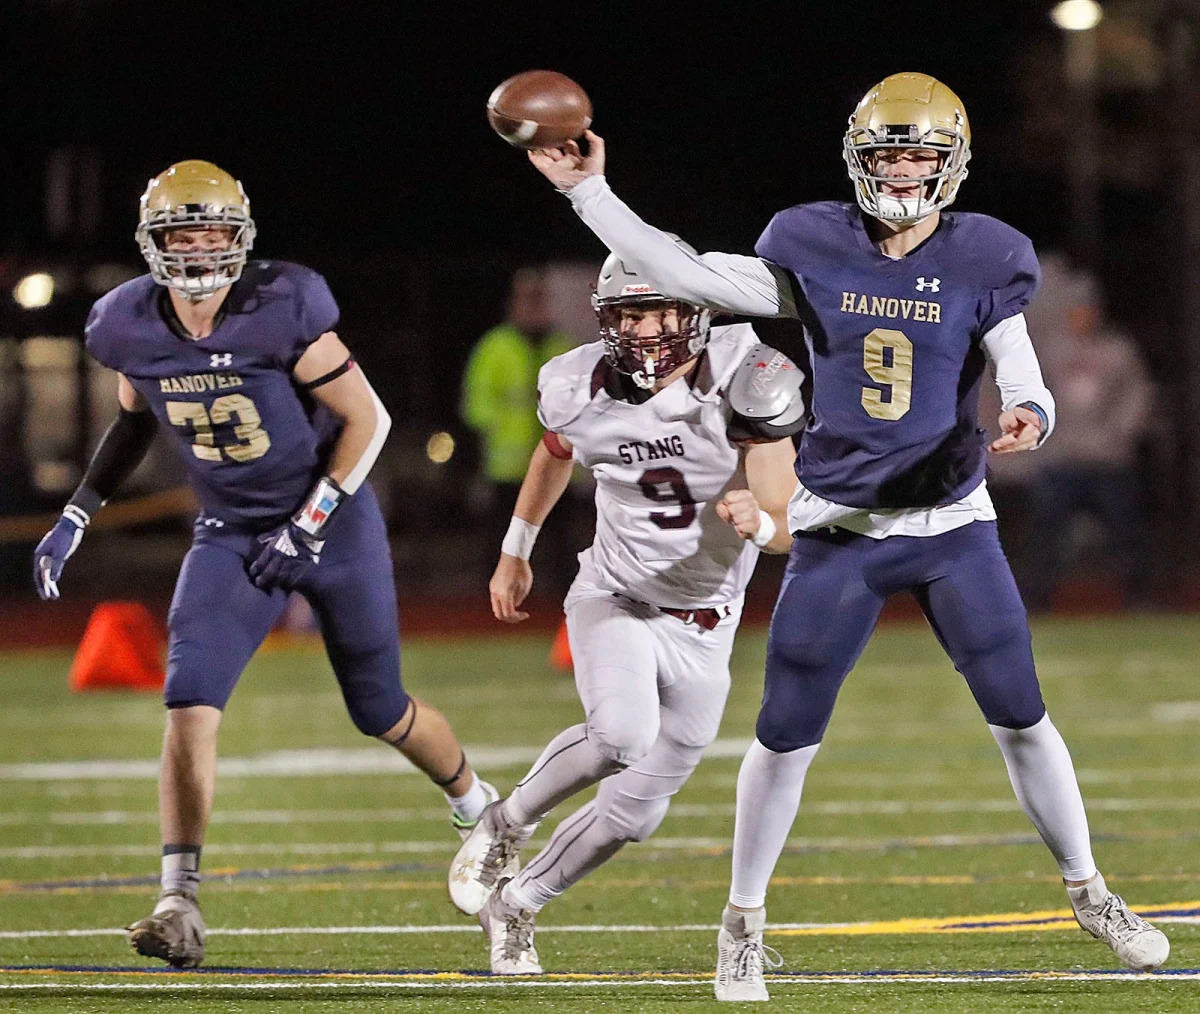 Unbeaten Hanover football storms back into state semifinals by blanking Bishop Stang